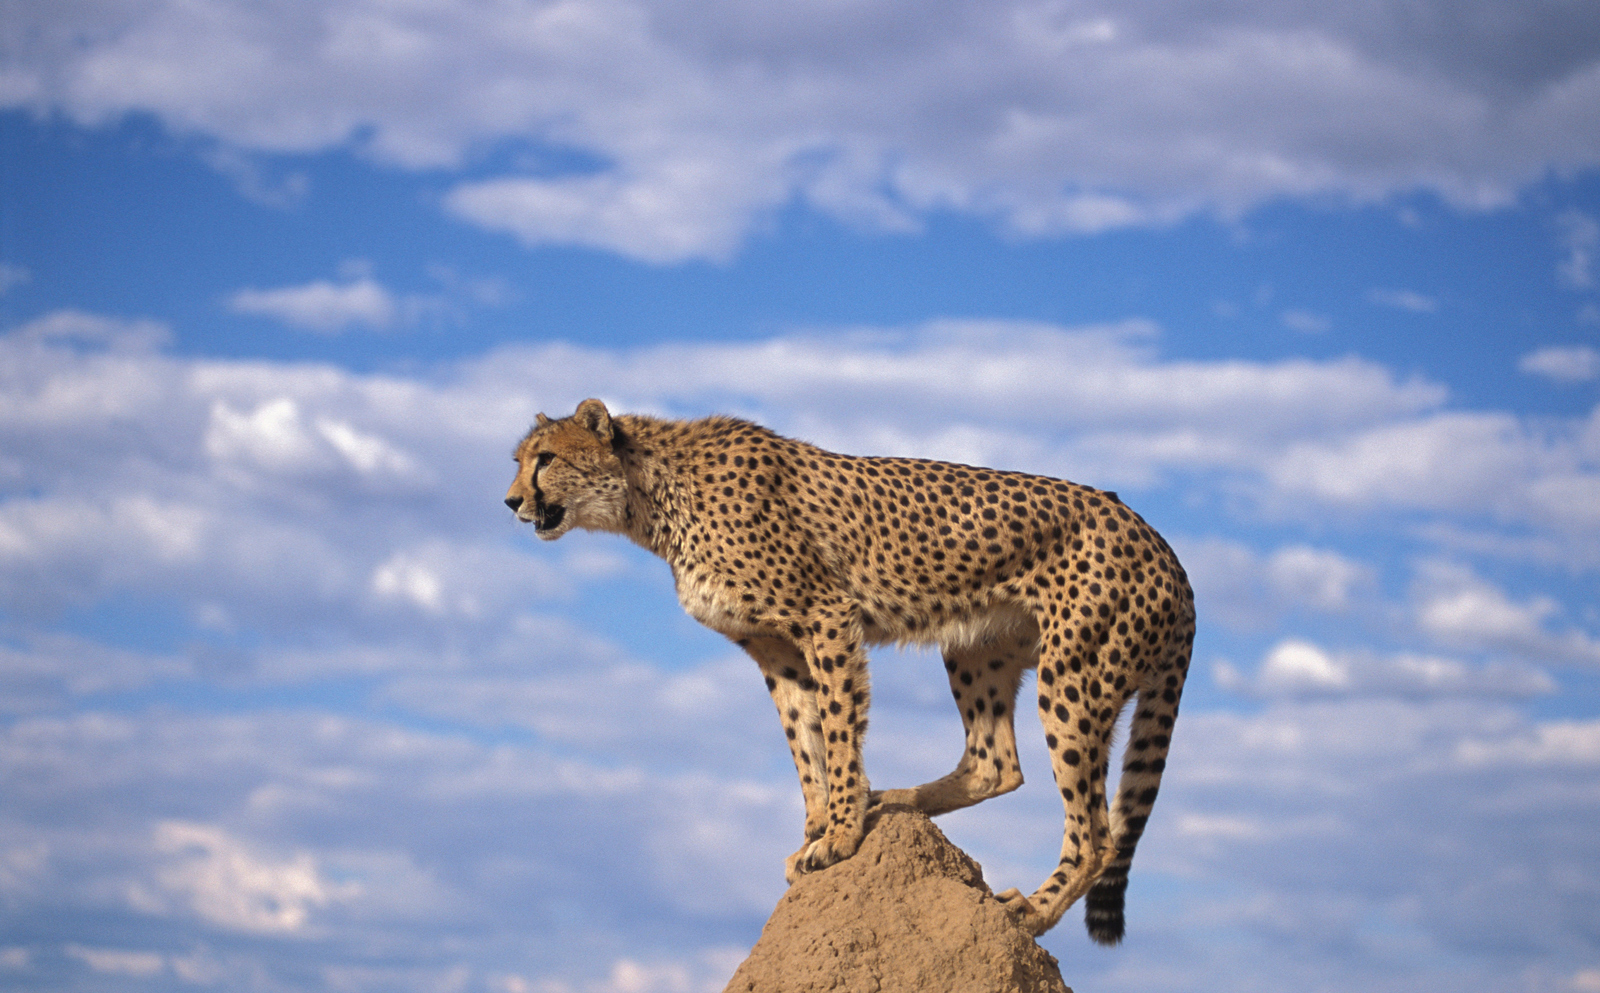 A cheetah on an anthill ©Andrew Harrington, Cheetah Conservation Fund